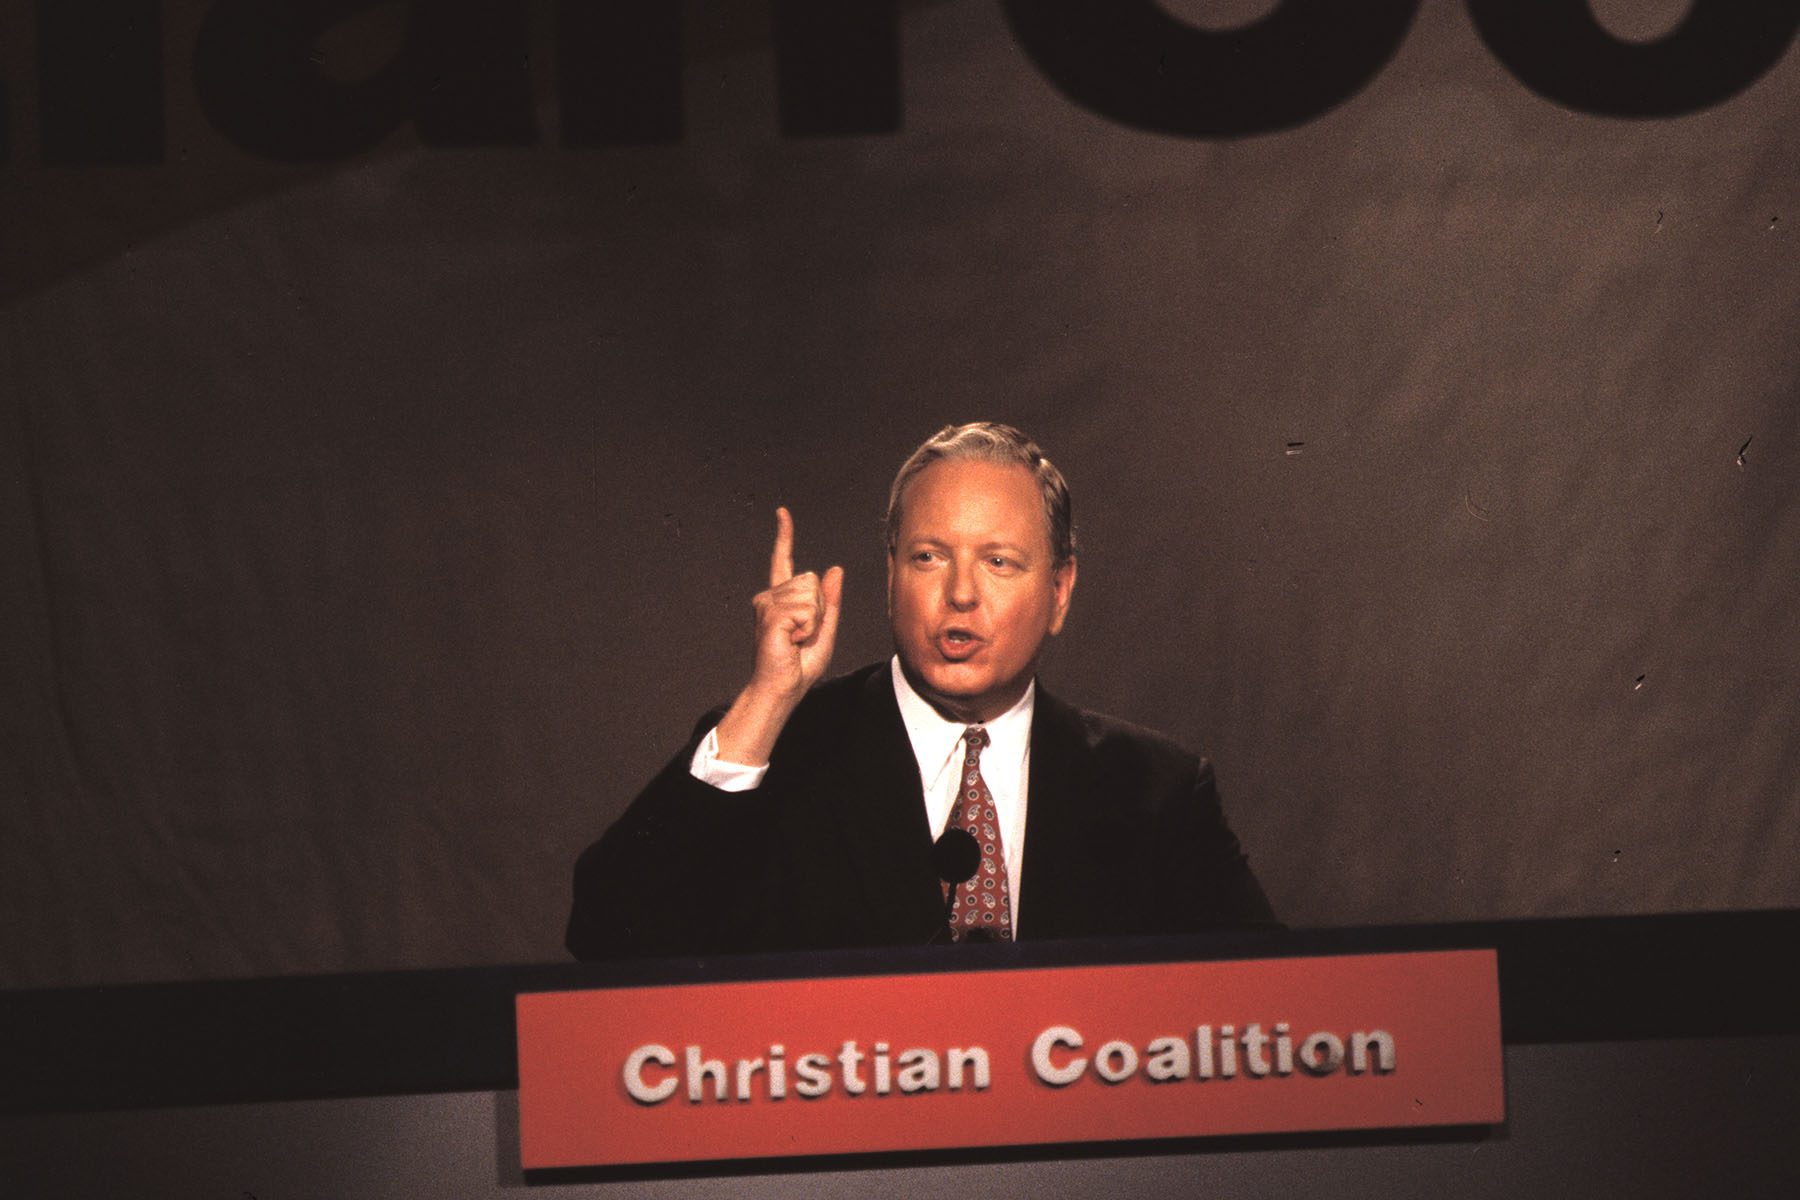 Paul Weyrich delivers a speech at a podium on which is written "Christian Coalition."